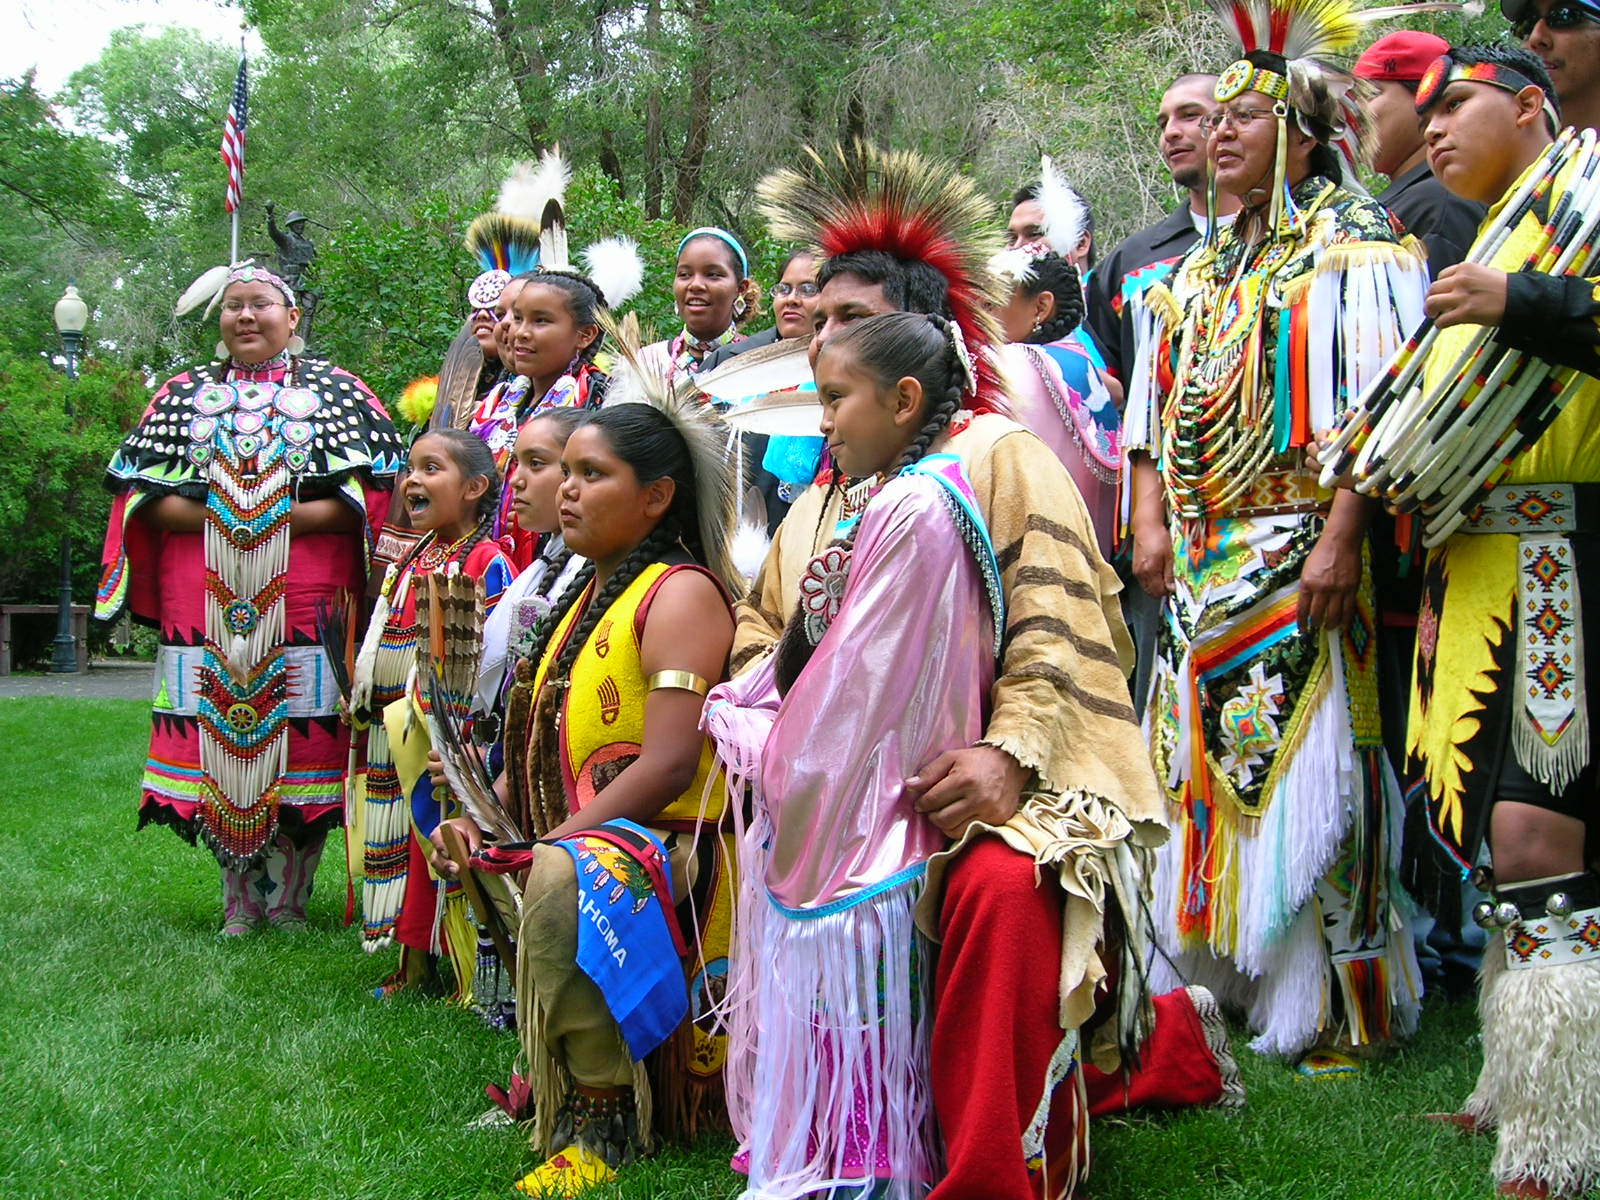 Shoshone dancers participate in International Day, which celebrates the diverse history and heritage of Rock Springs.